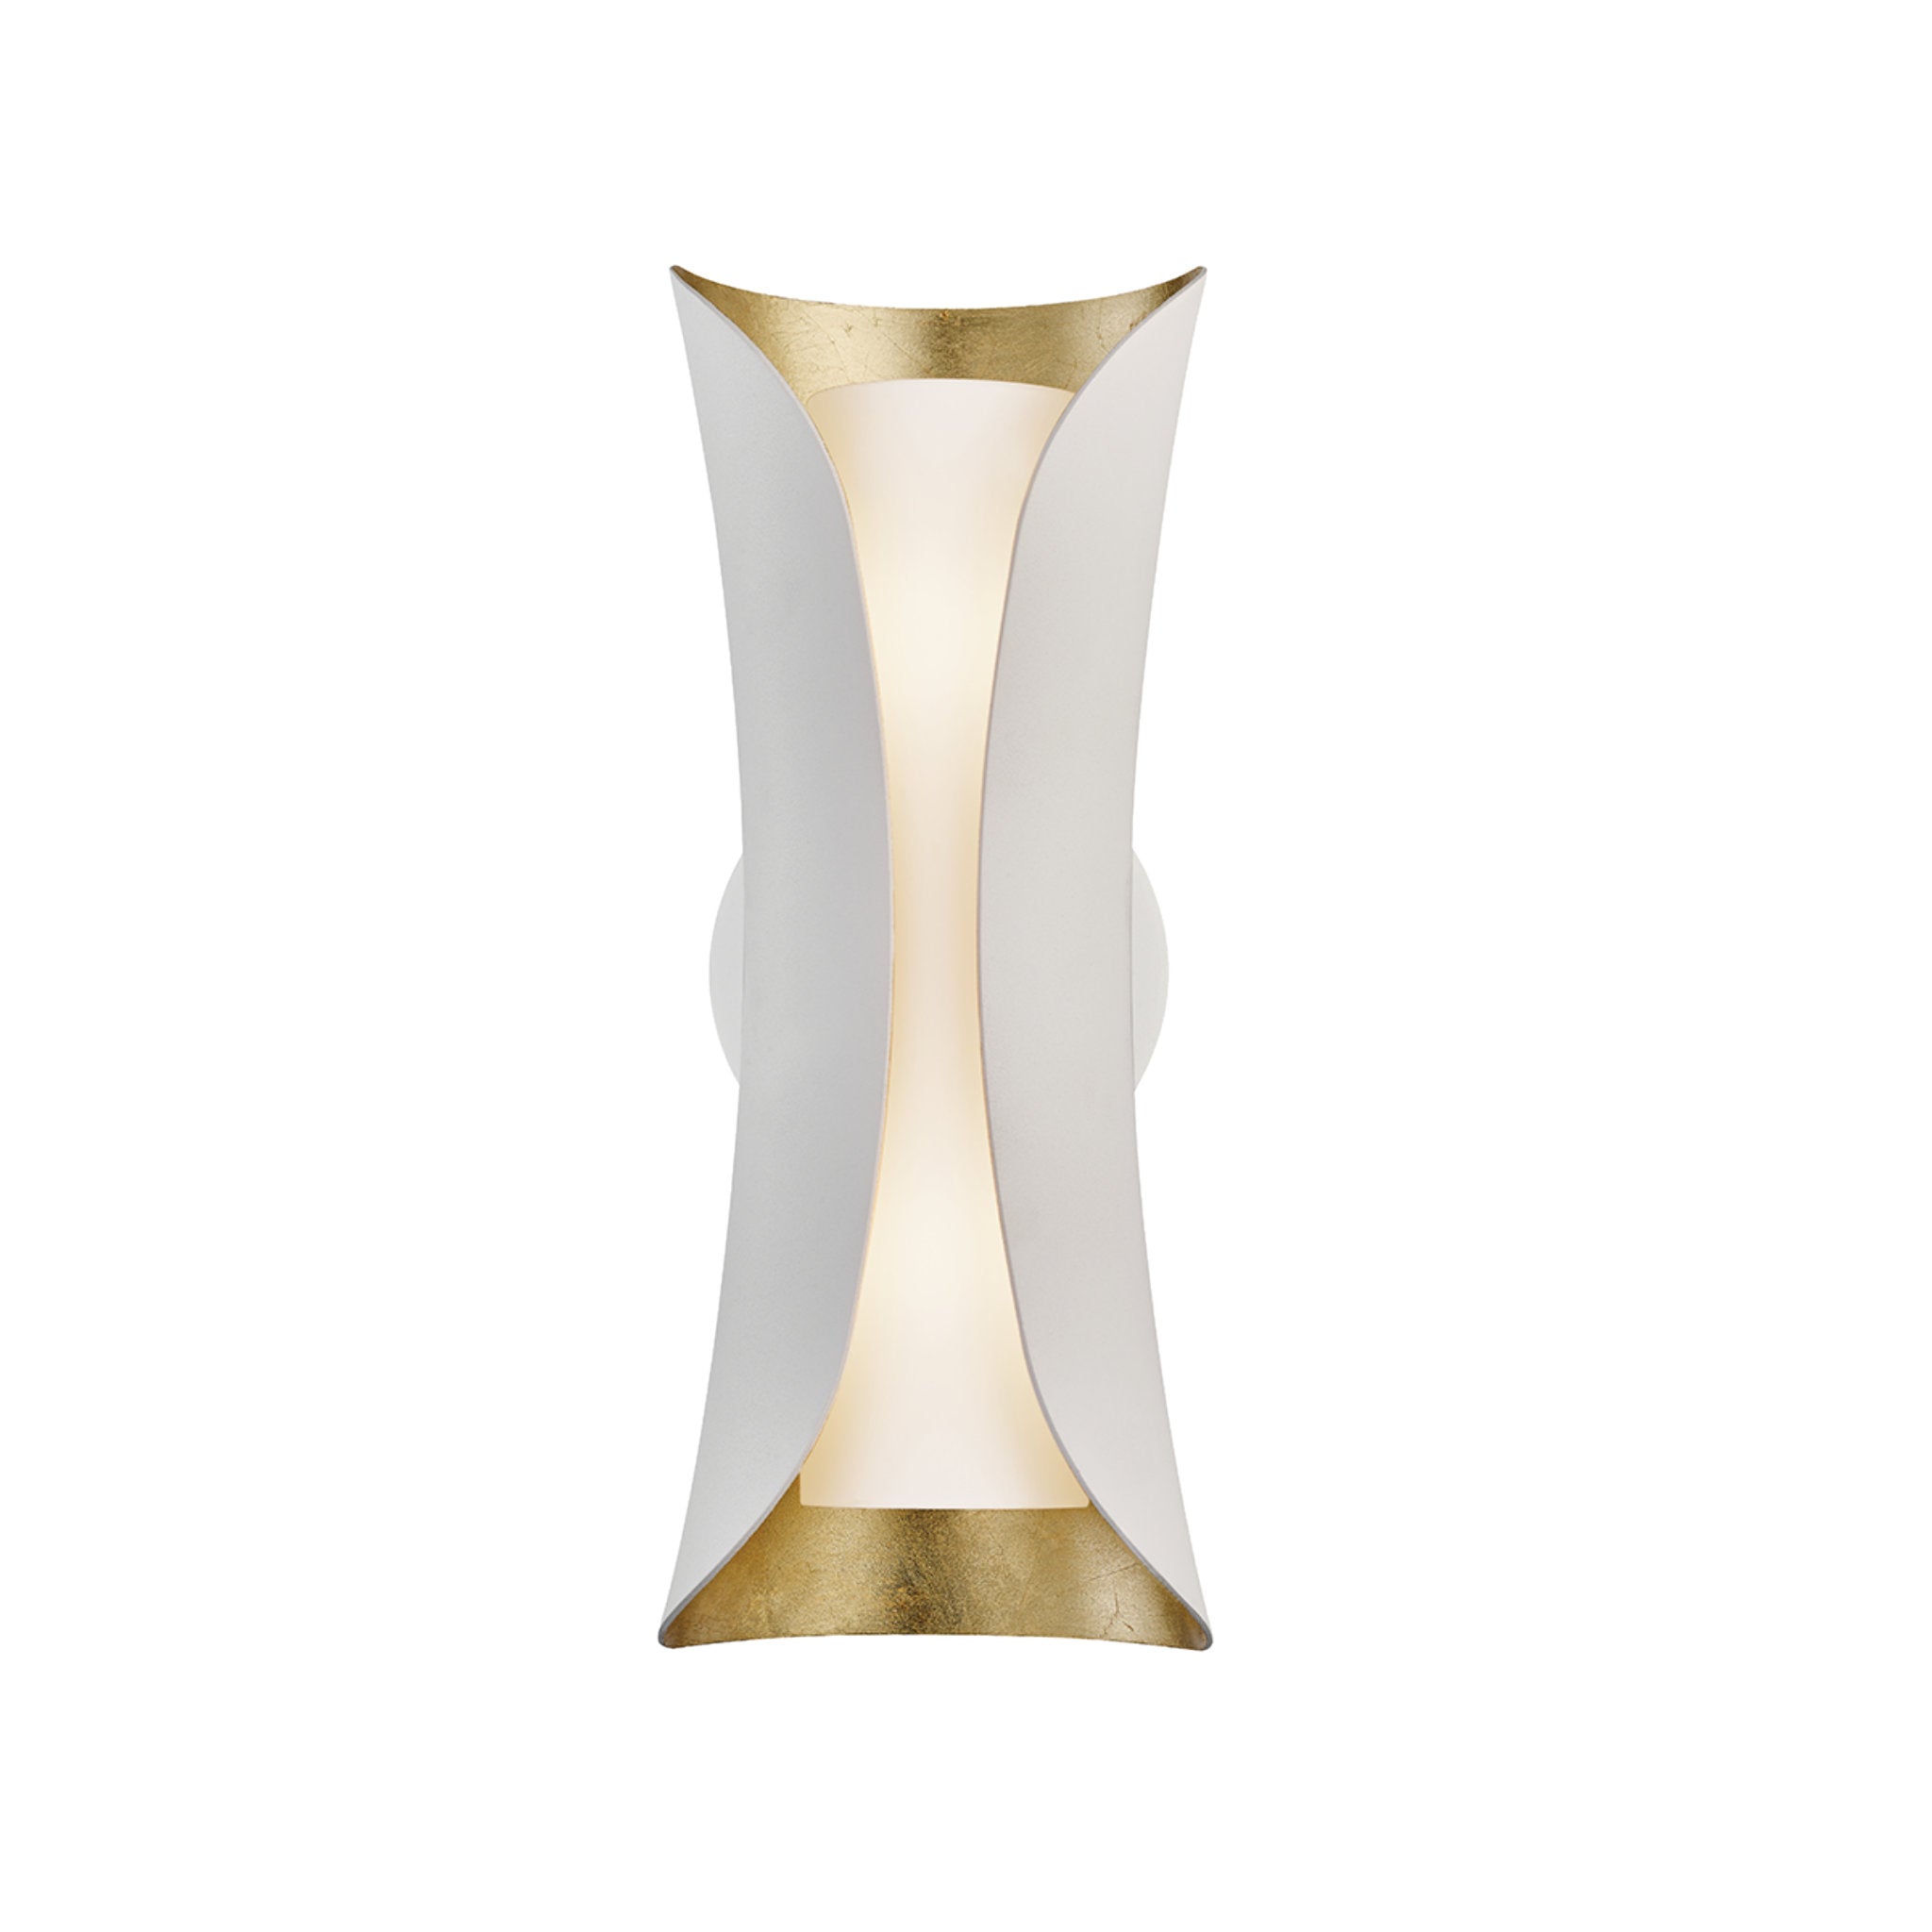 Josie 2-Light Wall Sconce in Gold Leaf/White